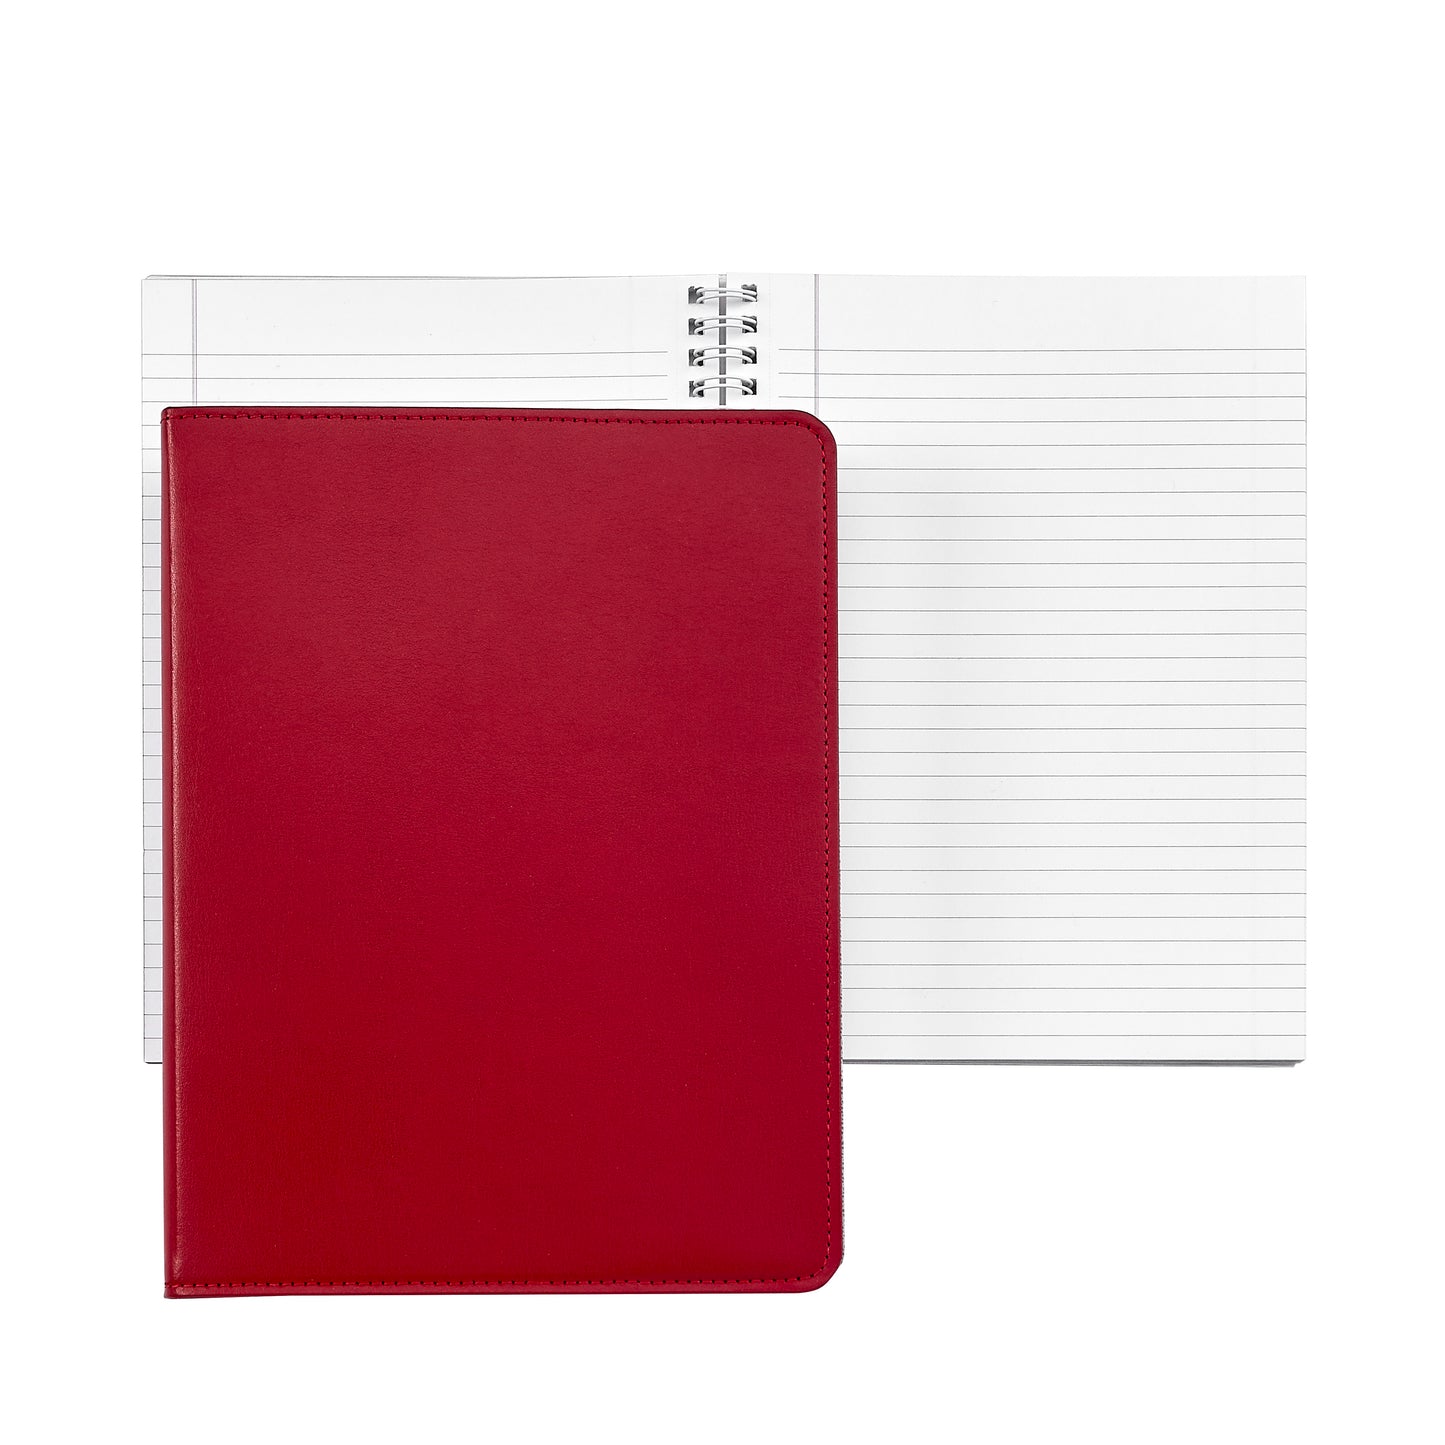 9 Inch Refillable Notebook